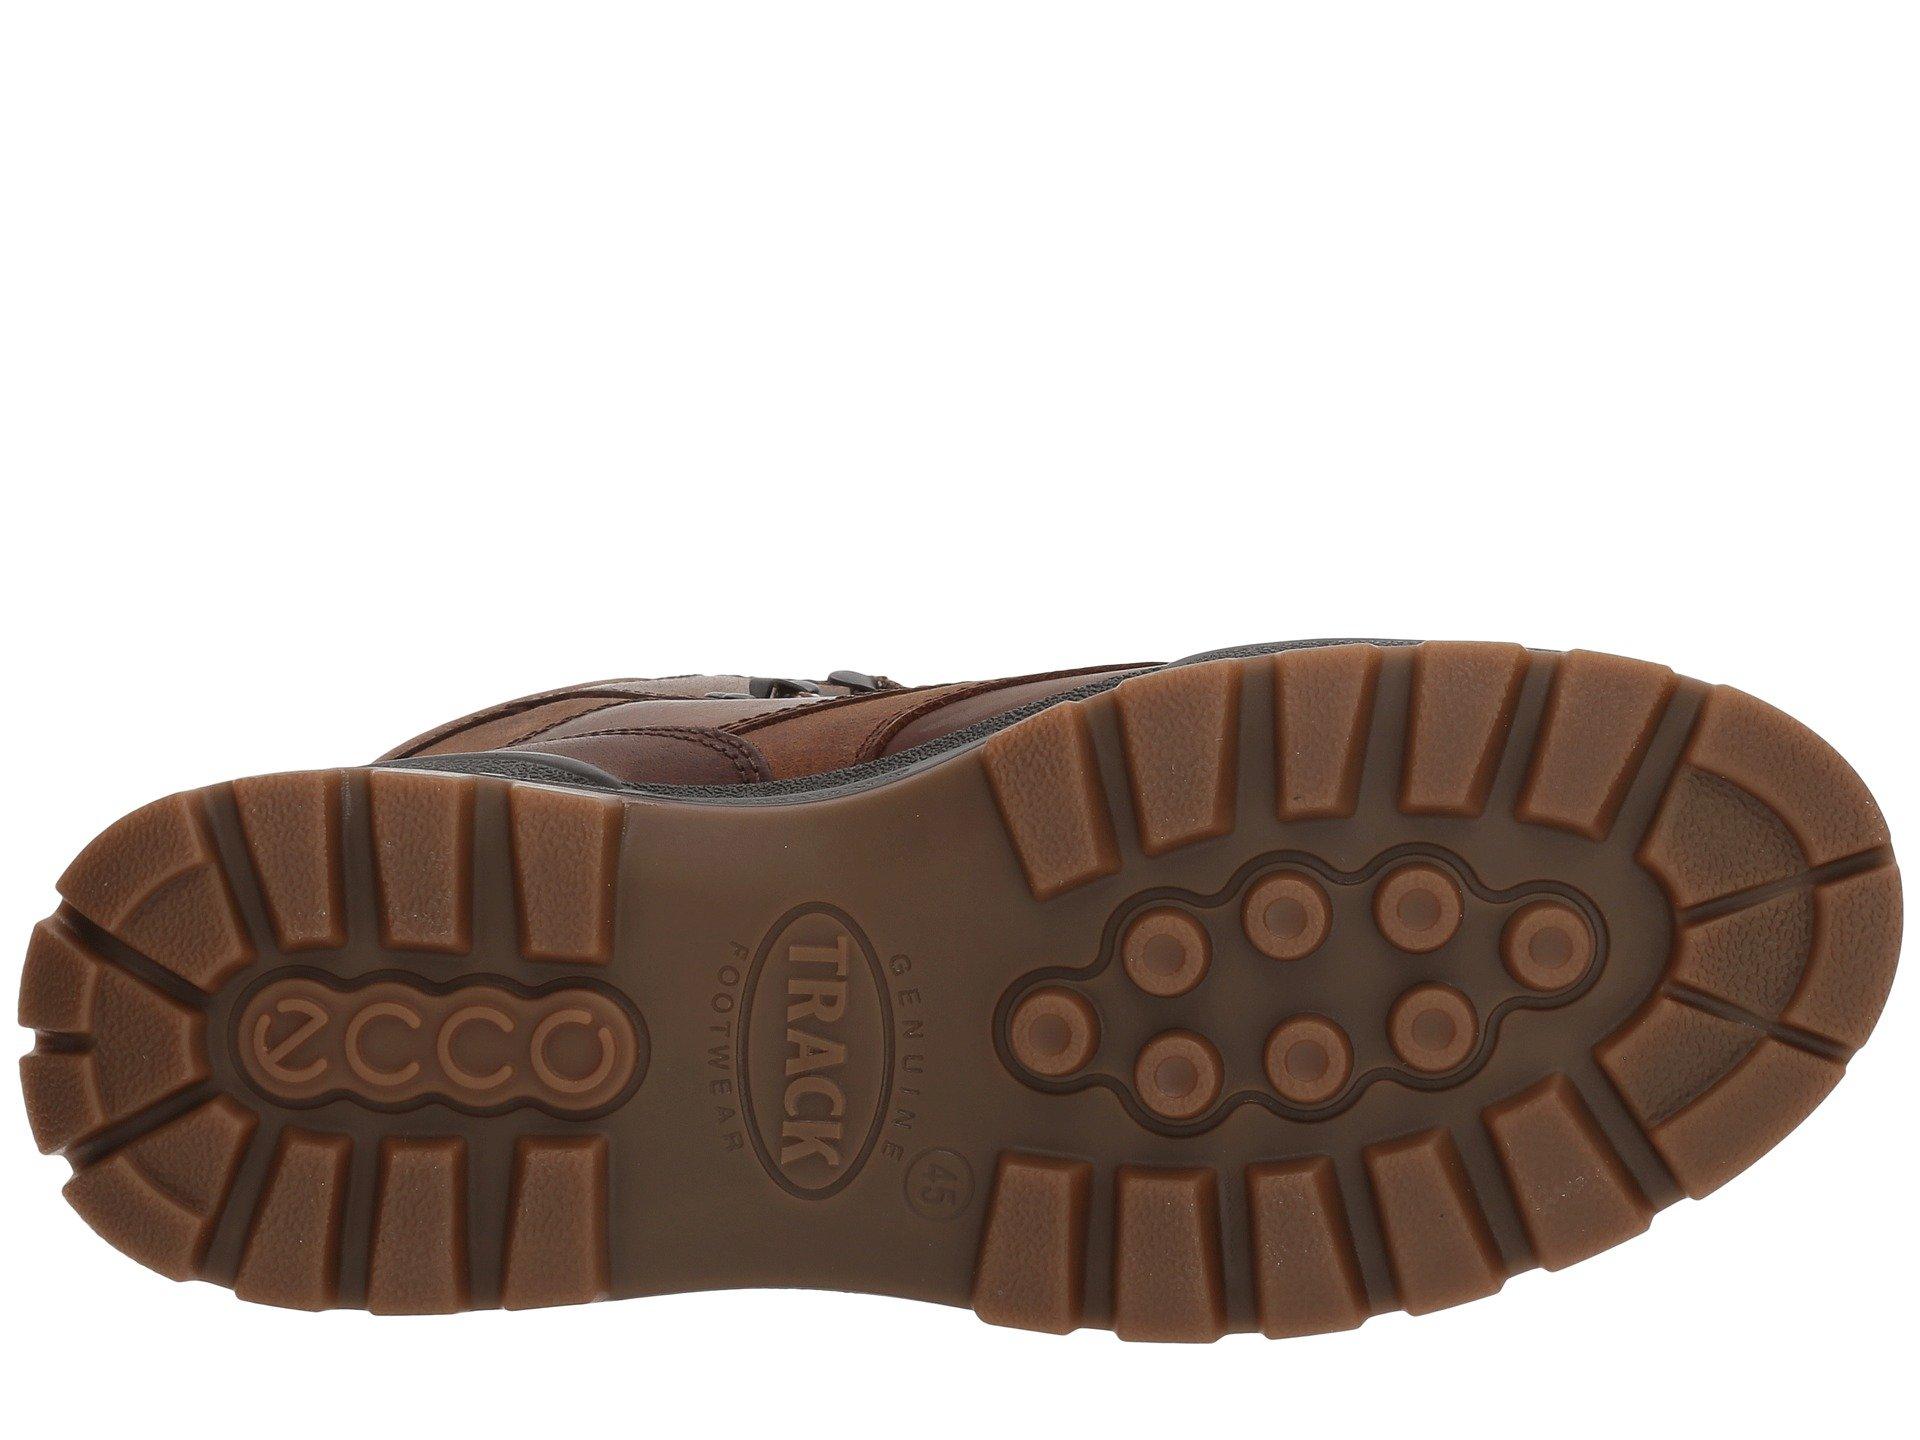 påske galleri tyk Ecco Leather Track 25 Premium High in Cocoa Brown/Camel (Brown) for Men -  Lyst